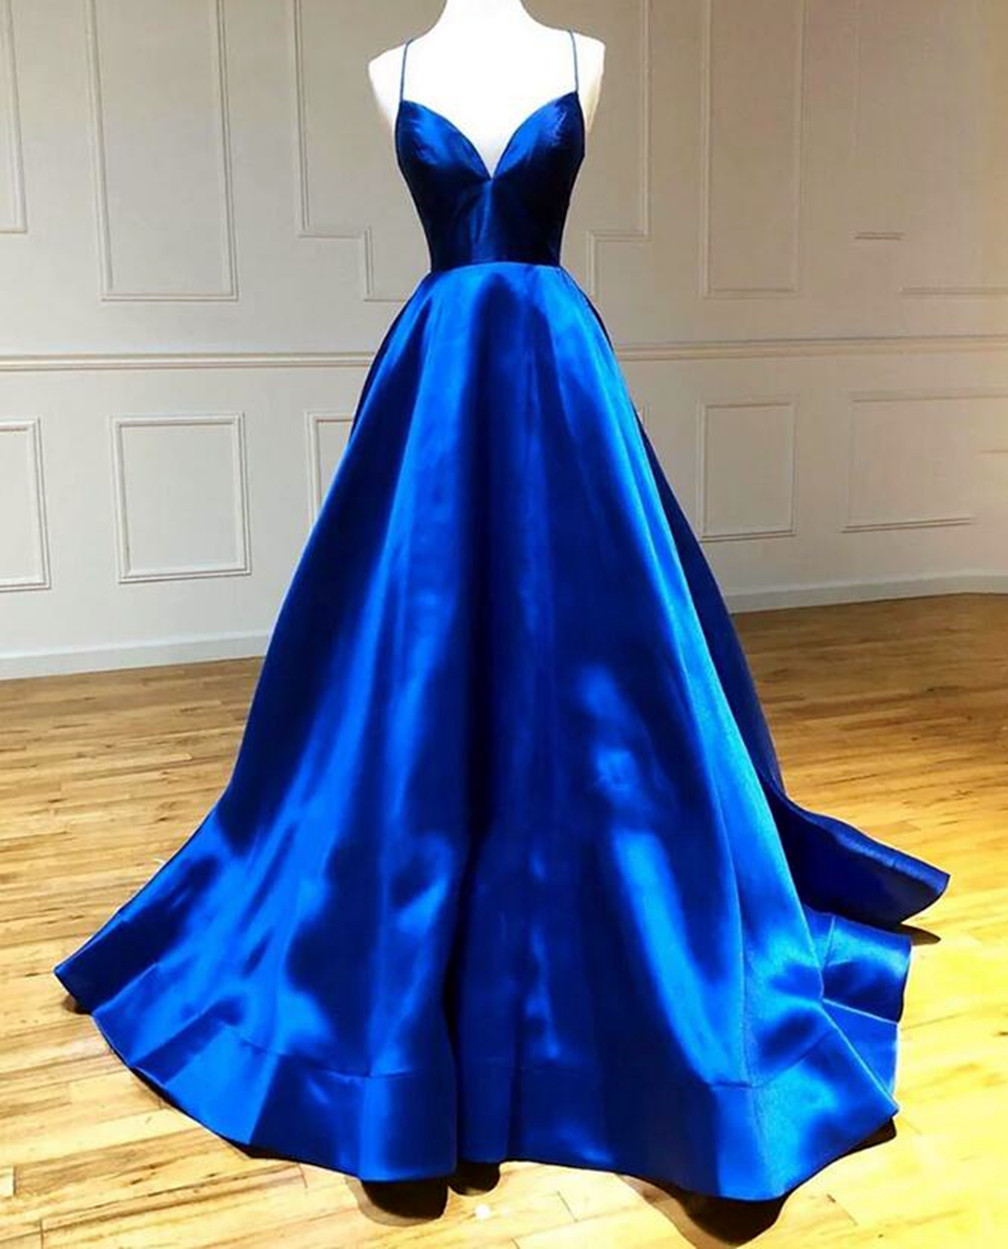 Women V-neck Satin Prom Dresses Long A-line Evening Party Gowns Sleeveless Formal Dress Yp047